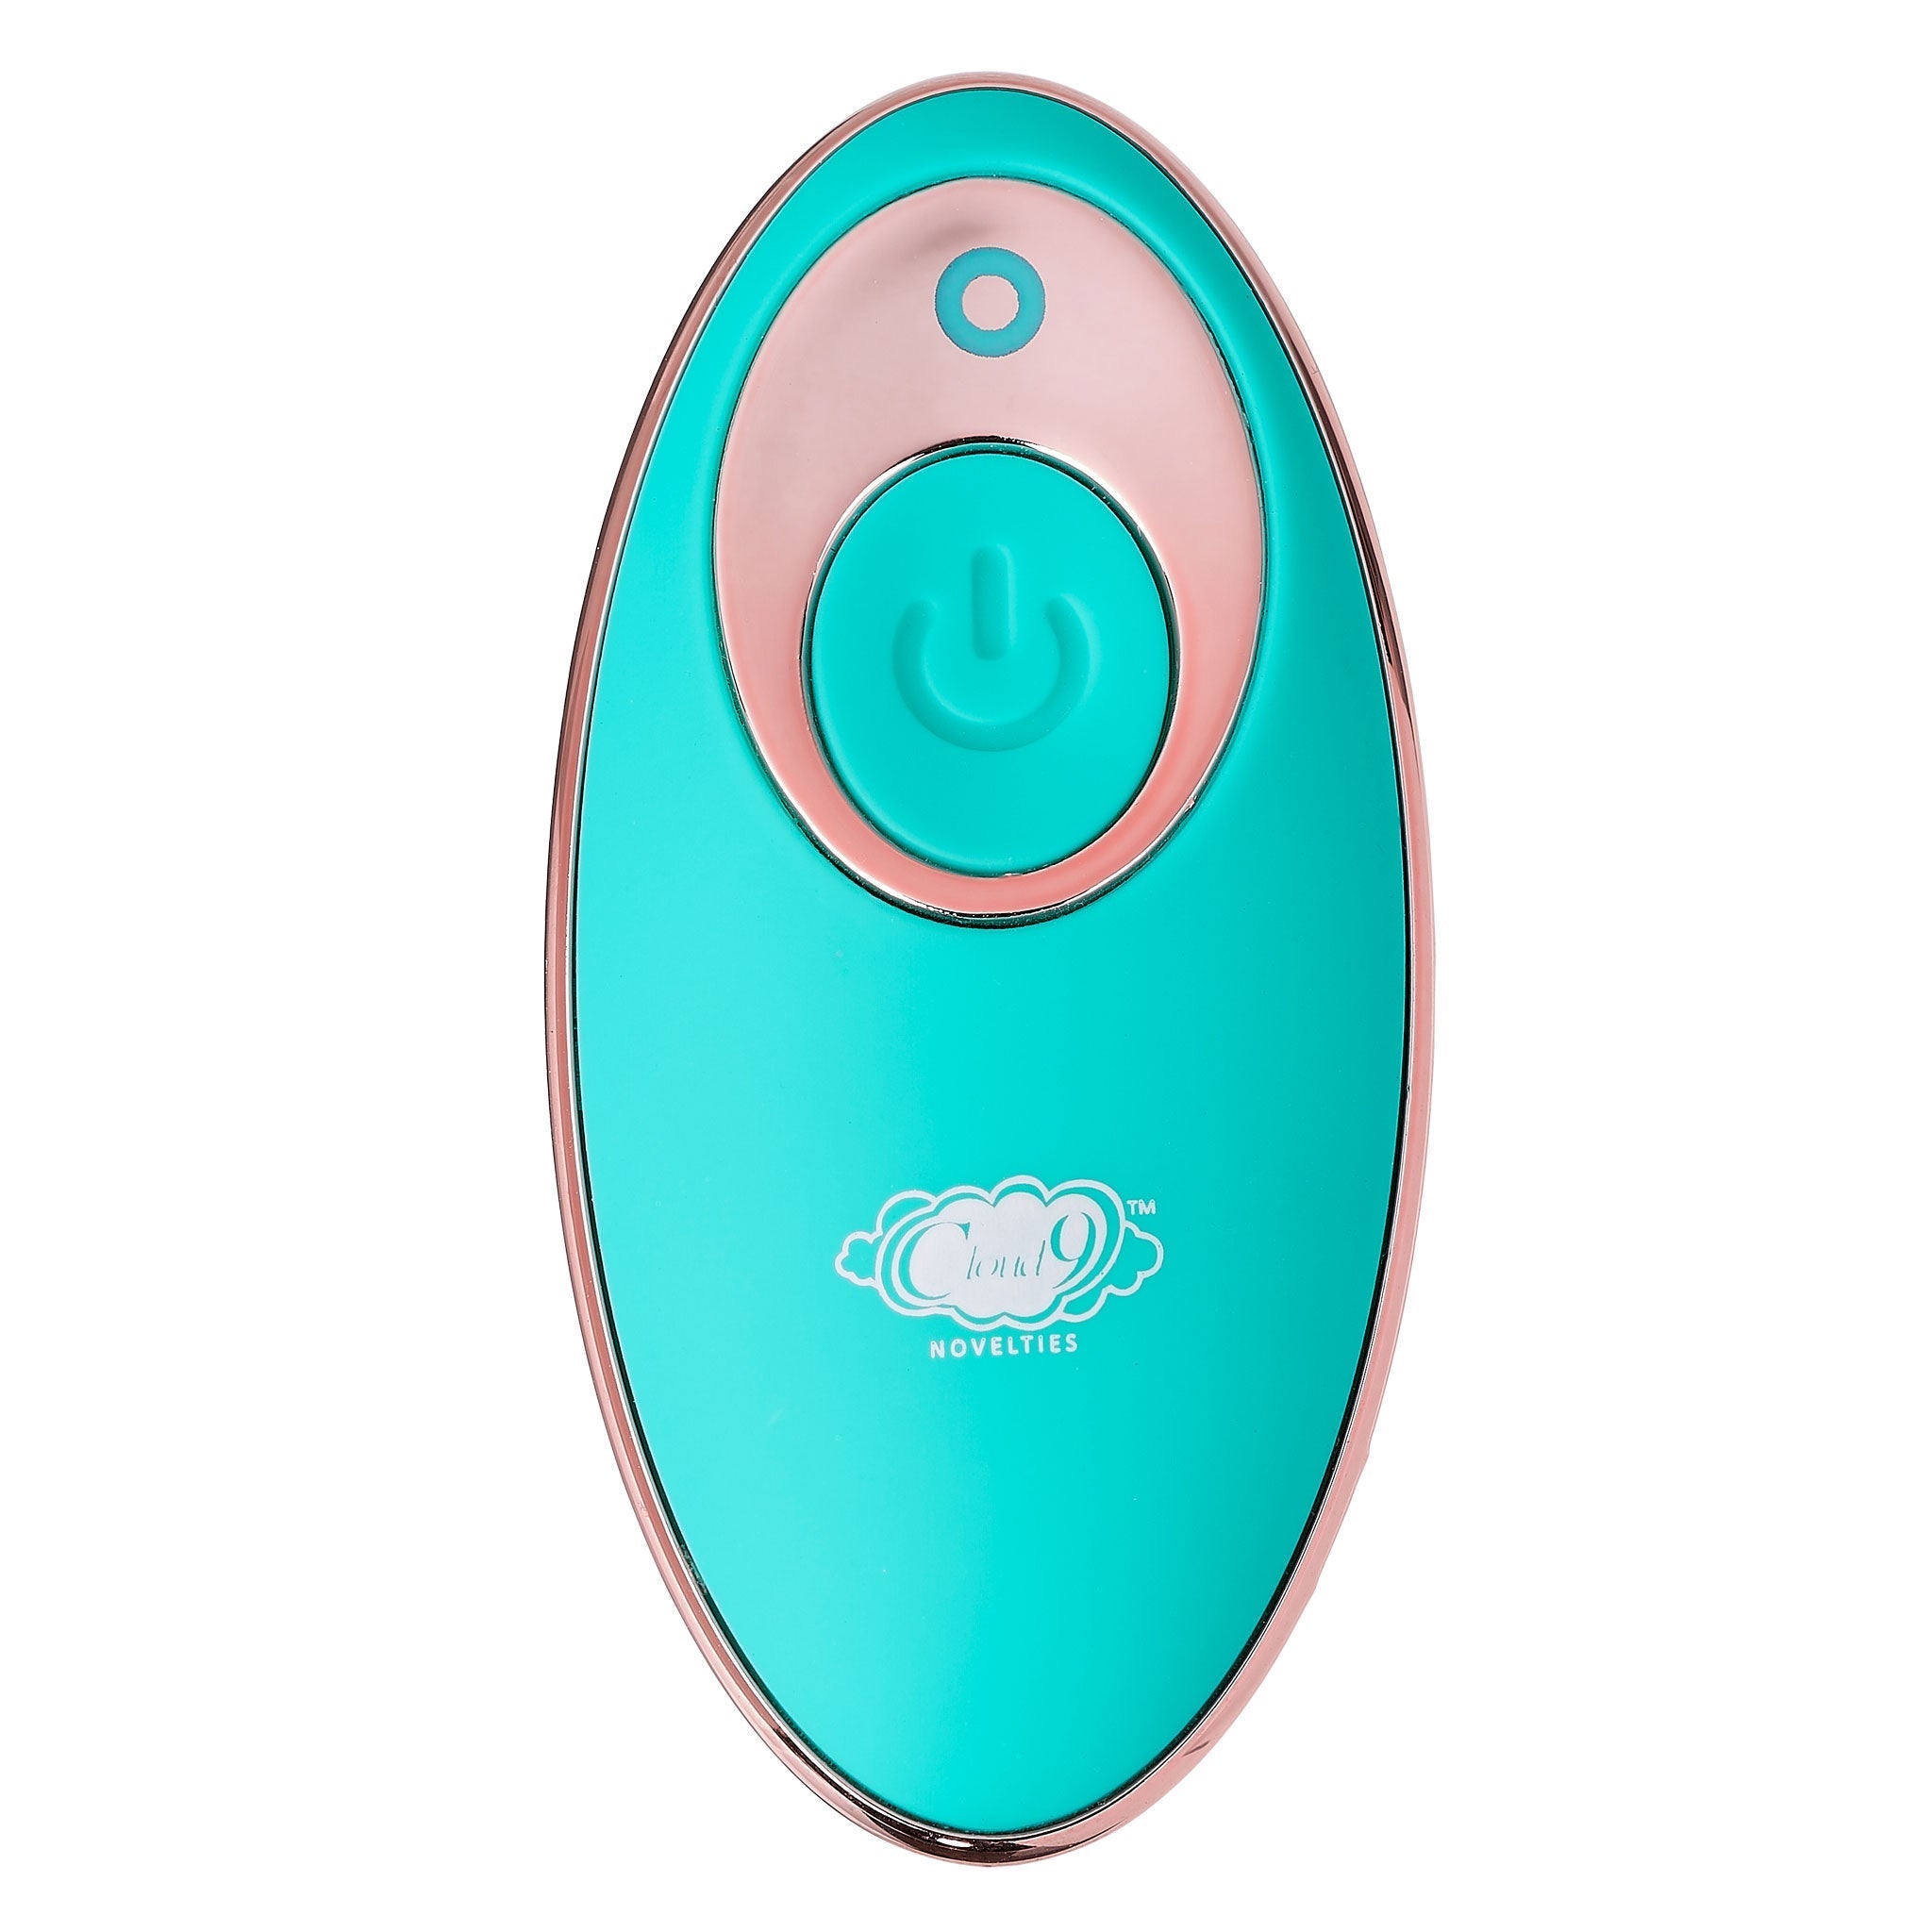 Cloud 9 Health & Wellness Wireless Remote Control Egg W/ Pulsating Motion Teal